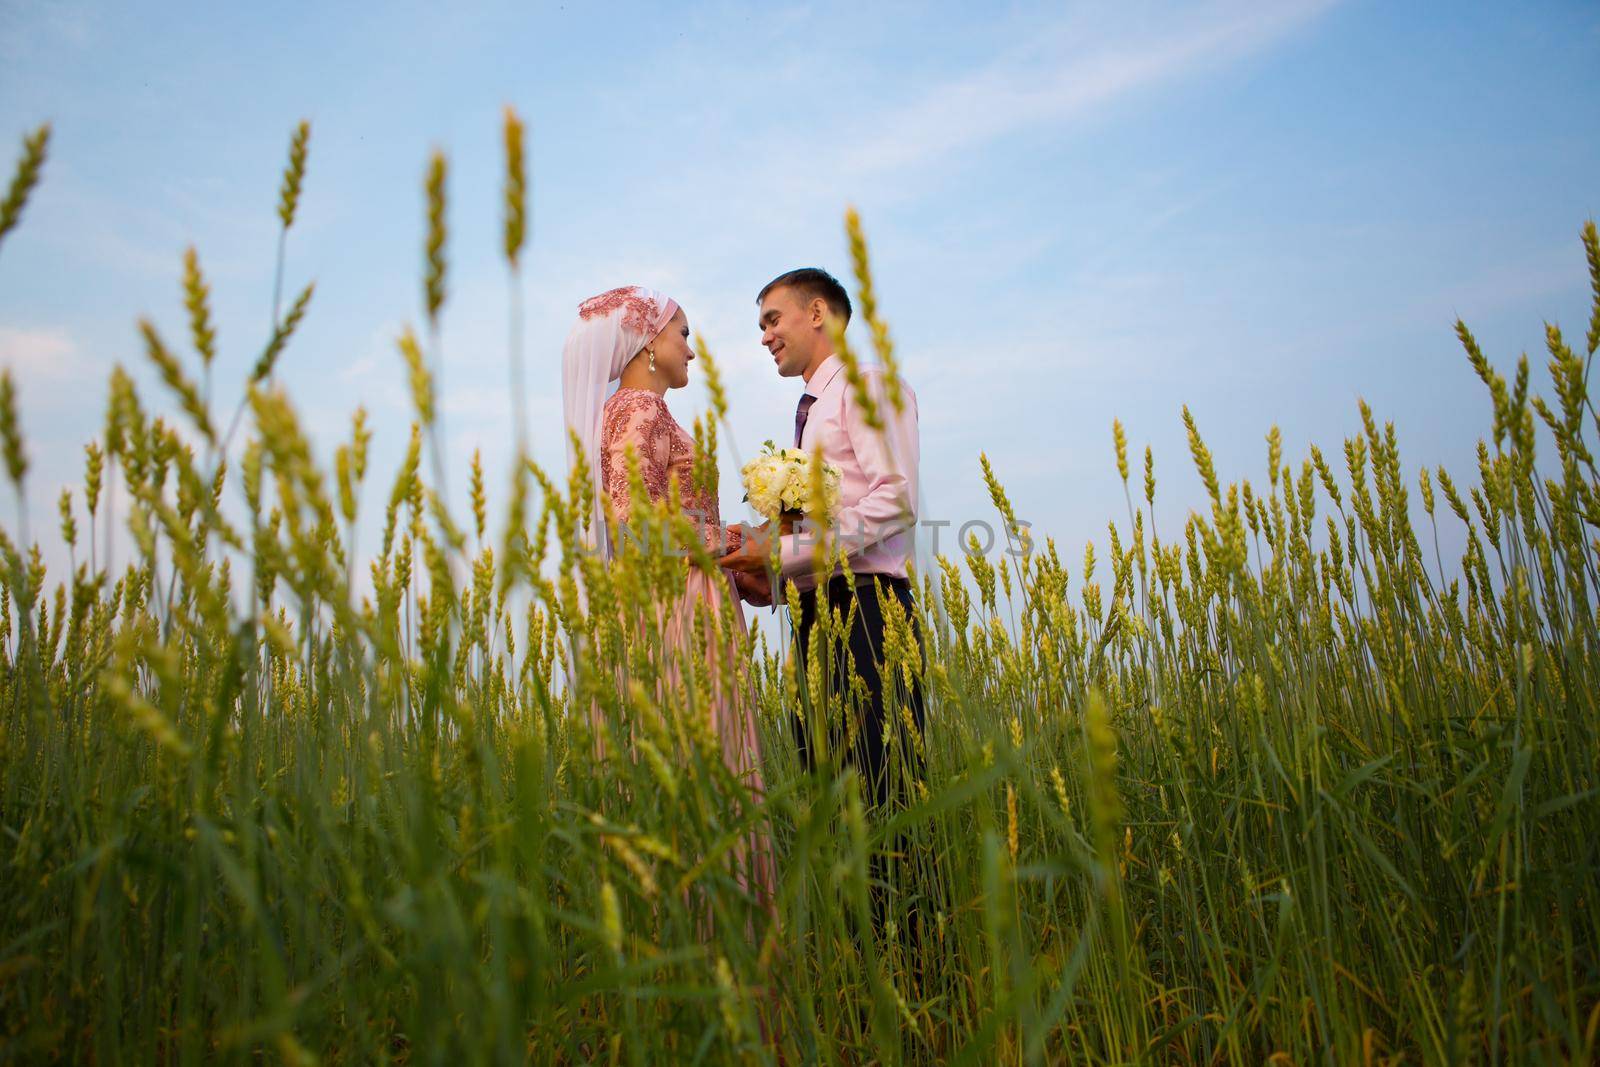 National wedding. Bride and groom in the field. Wedding muslim couple during the marriage ceremony. Muslim marriage.